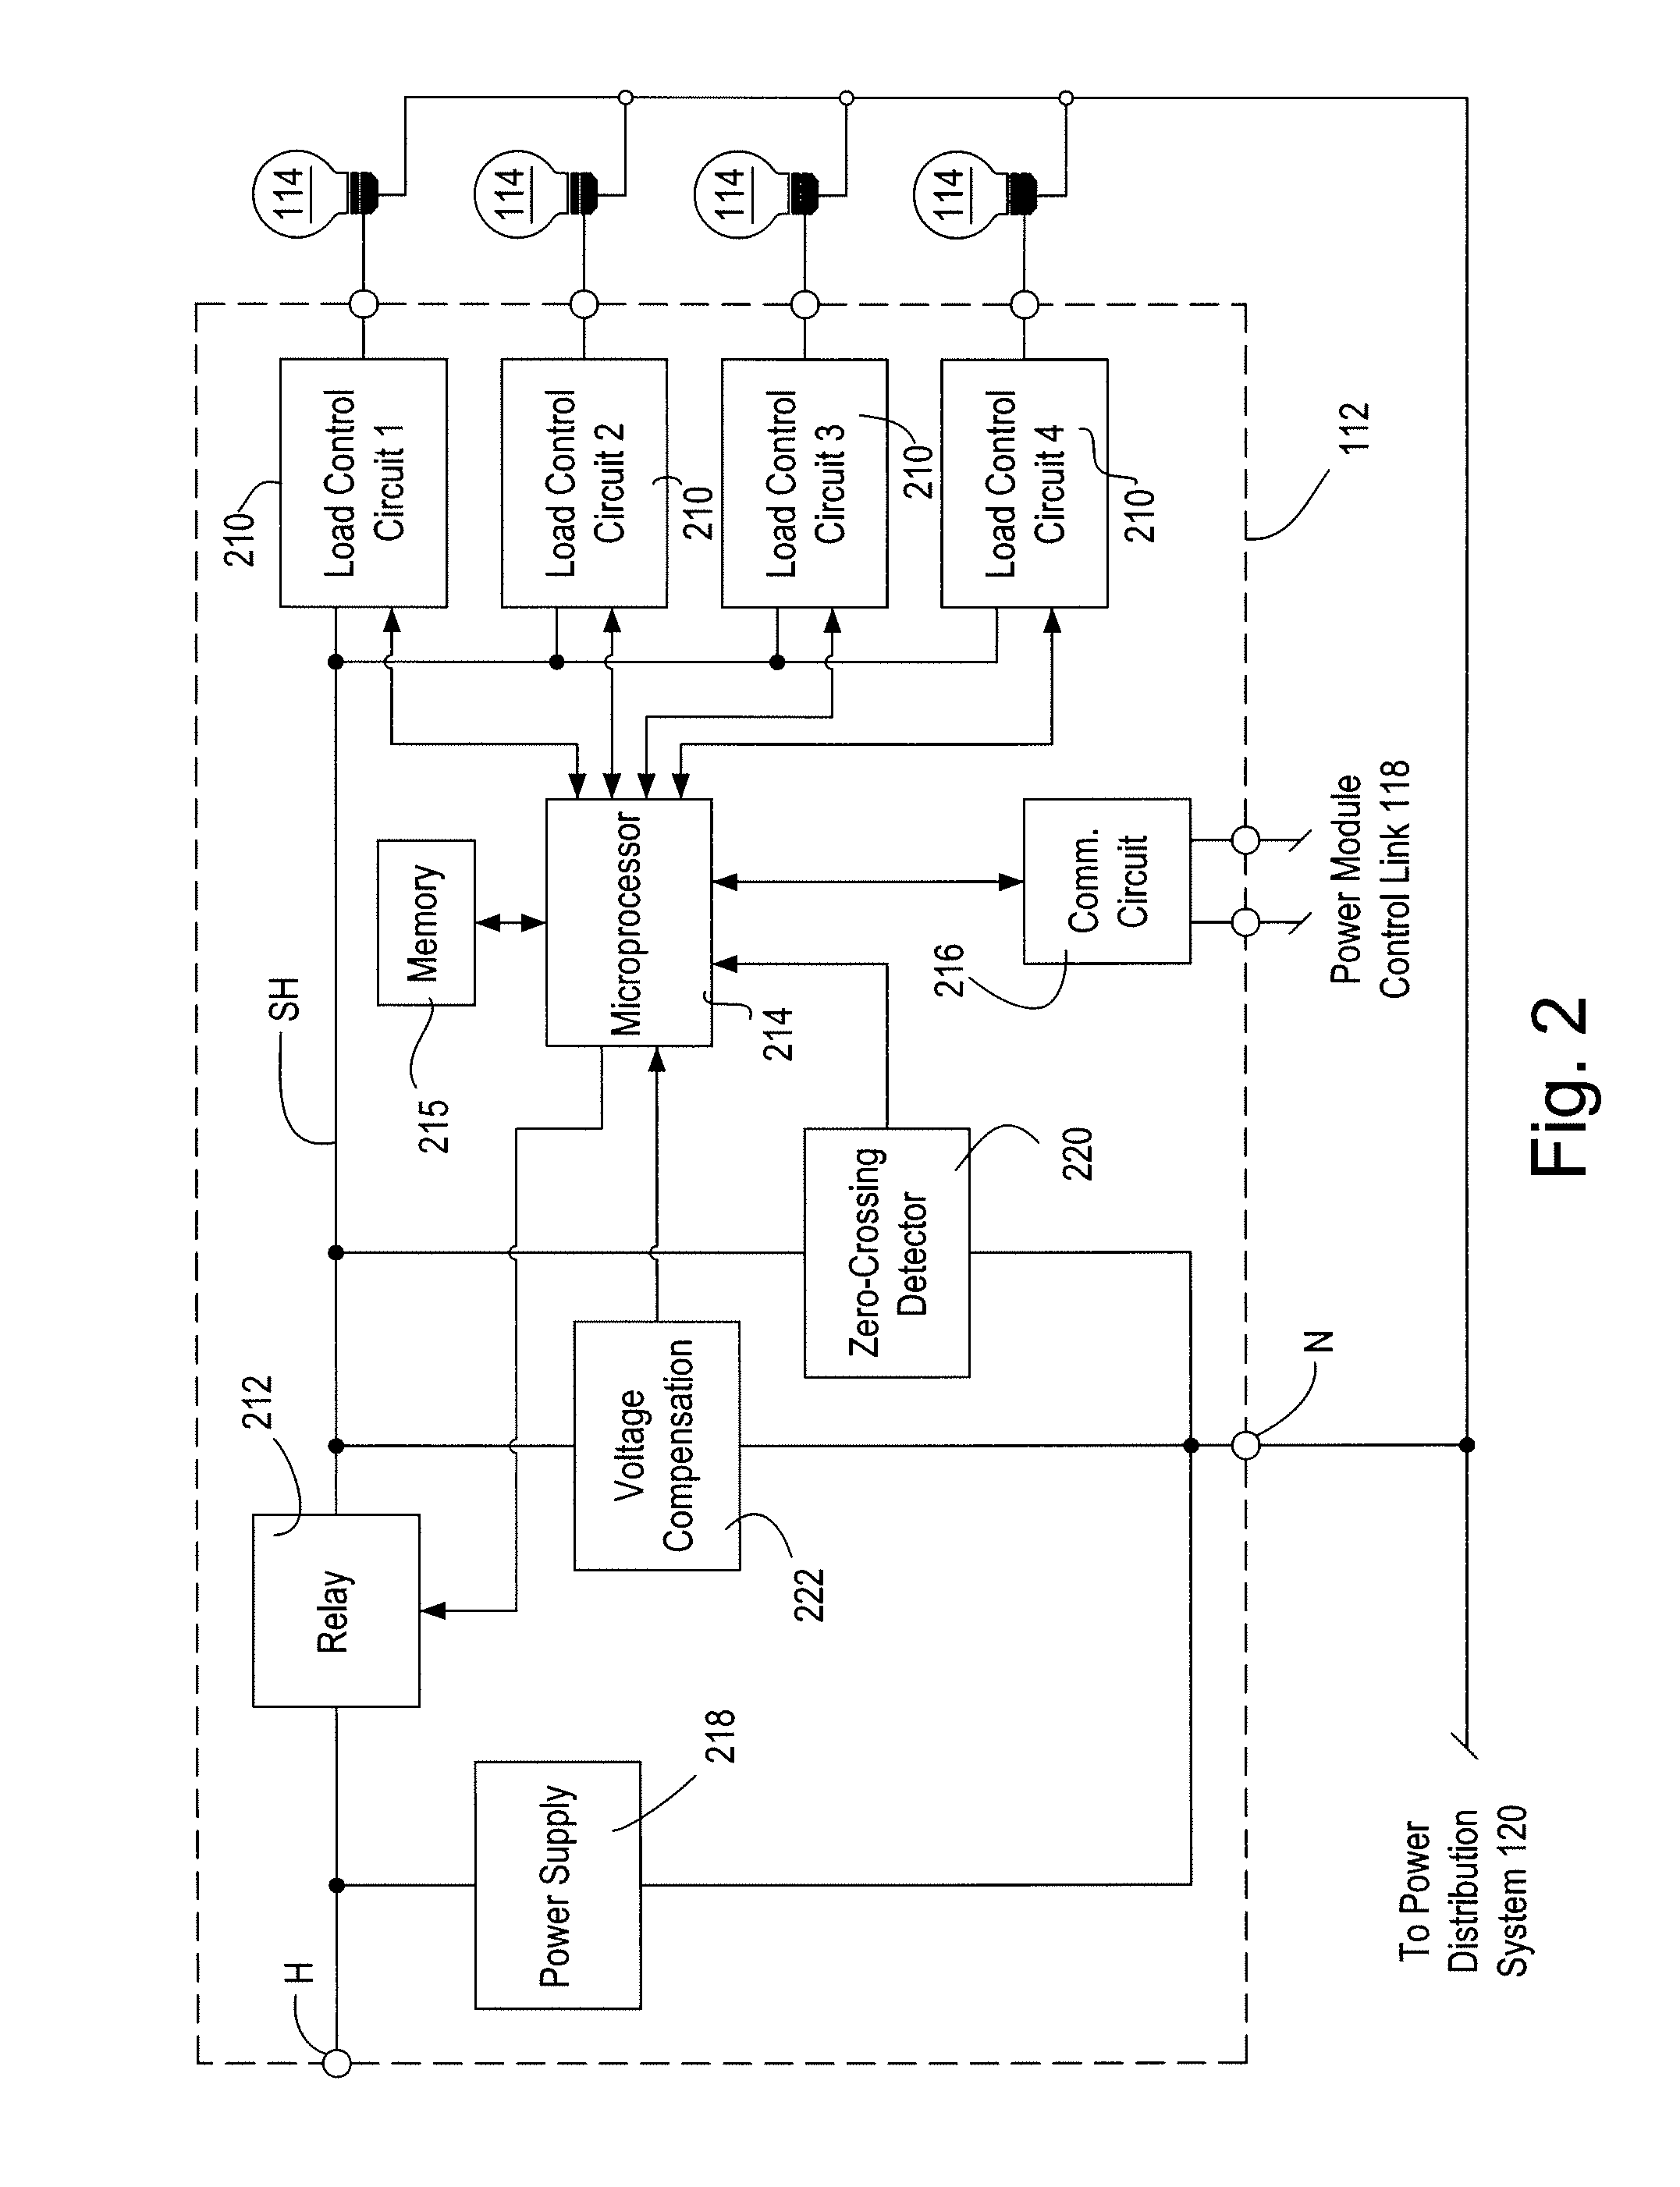 Method of powering up a plurality of loads in sequence